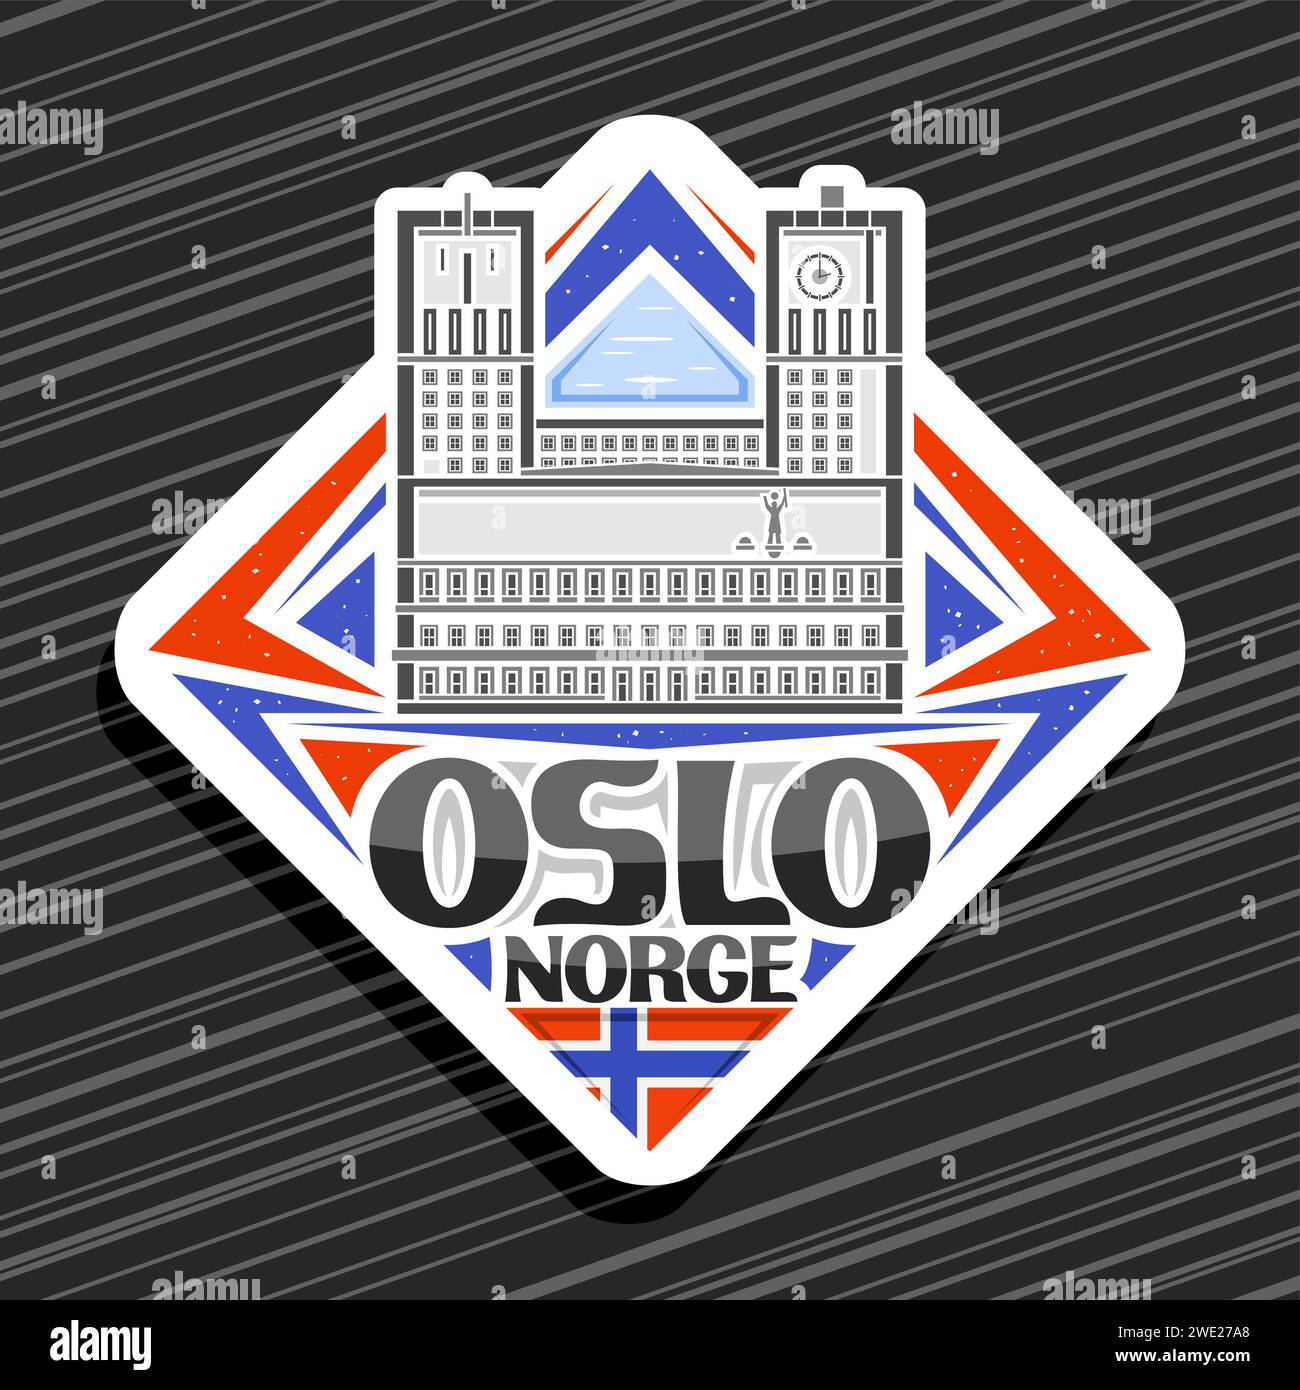 Vector logo for Oslo, white rhombus road sign with line illustration of famous oslo city hall on day sky background, decorative refrigerator magnet wi Stock Vector